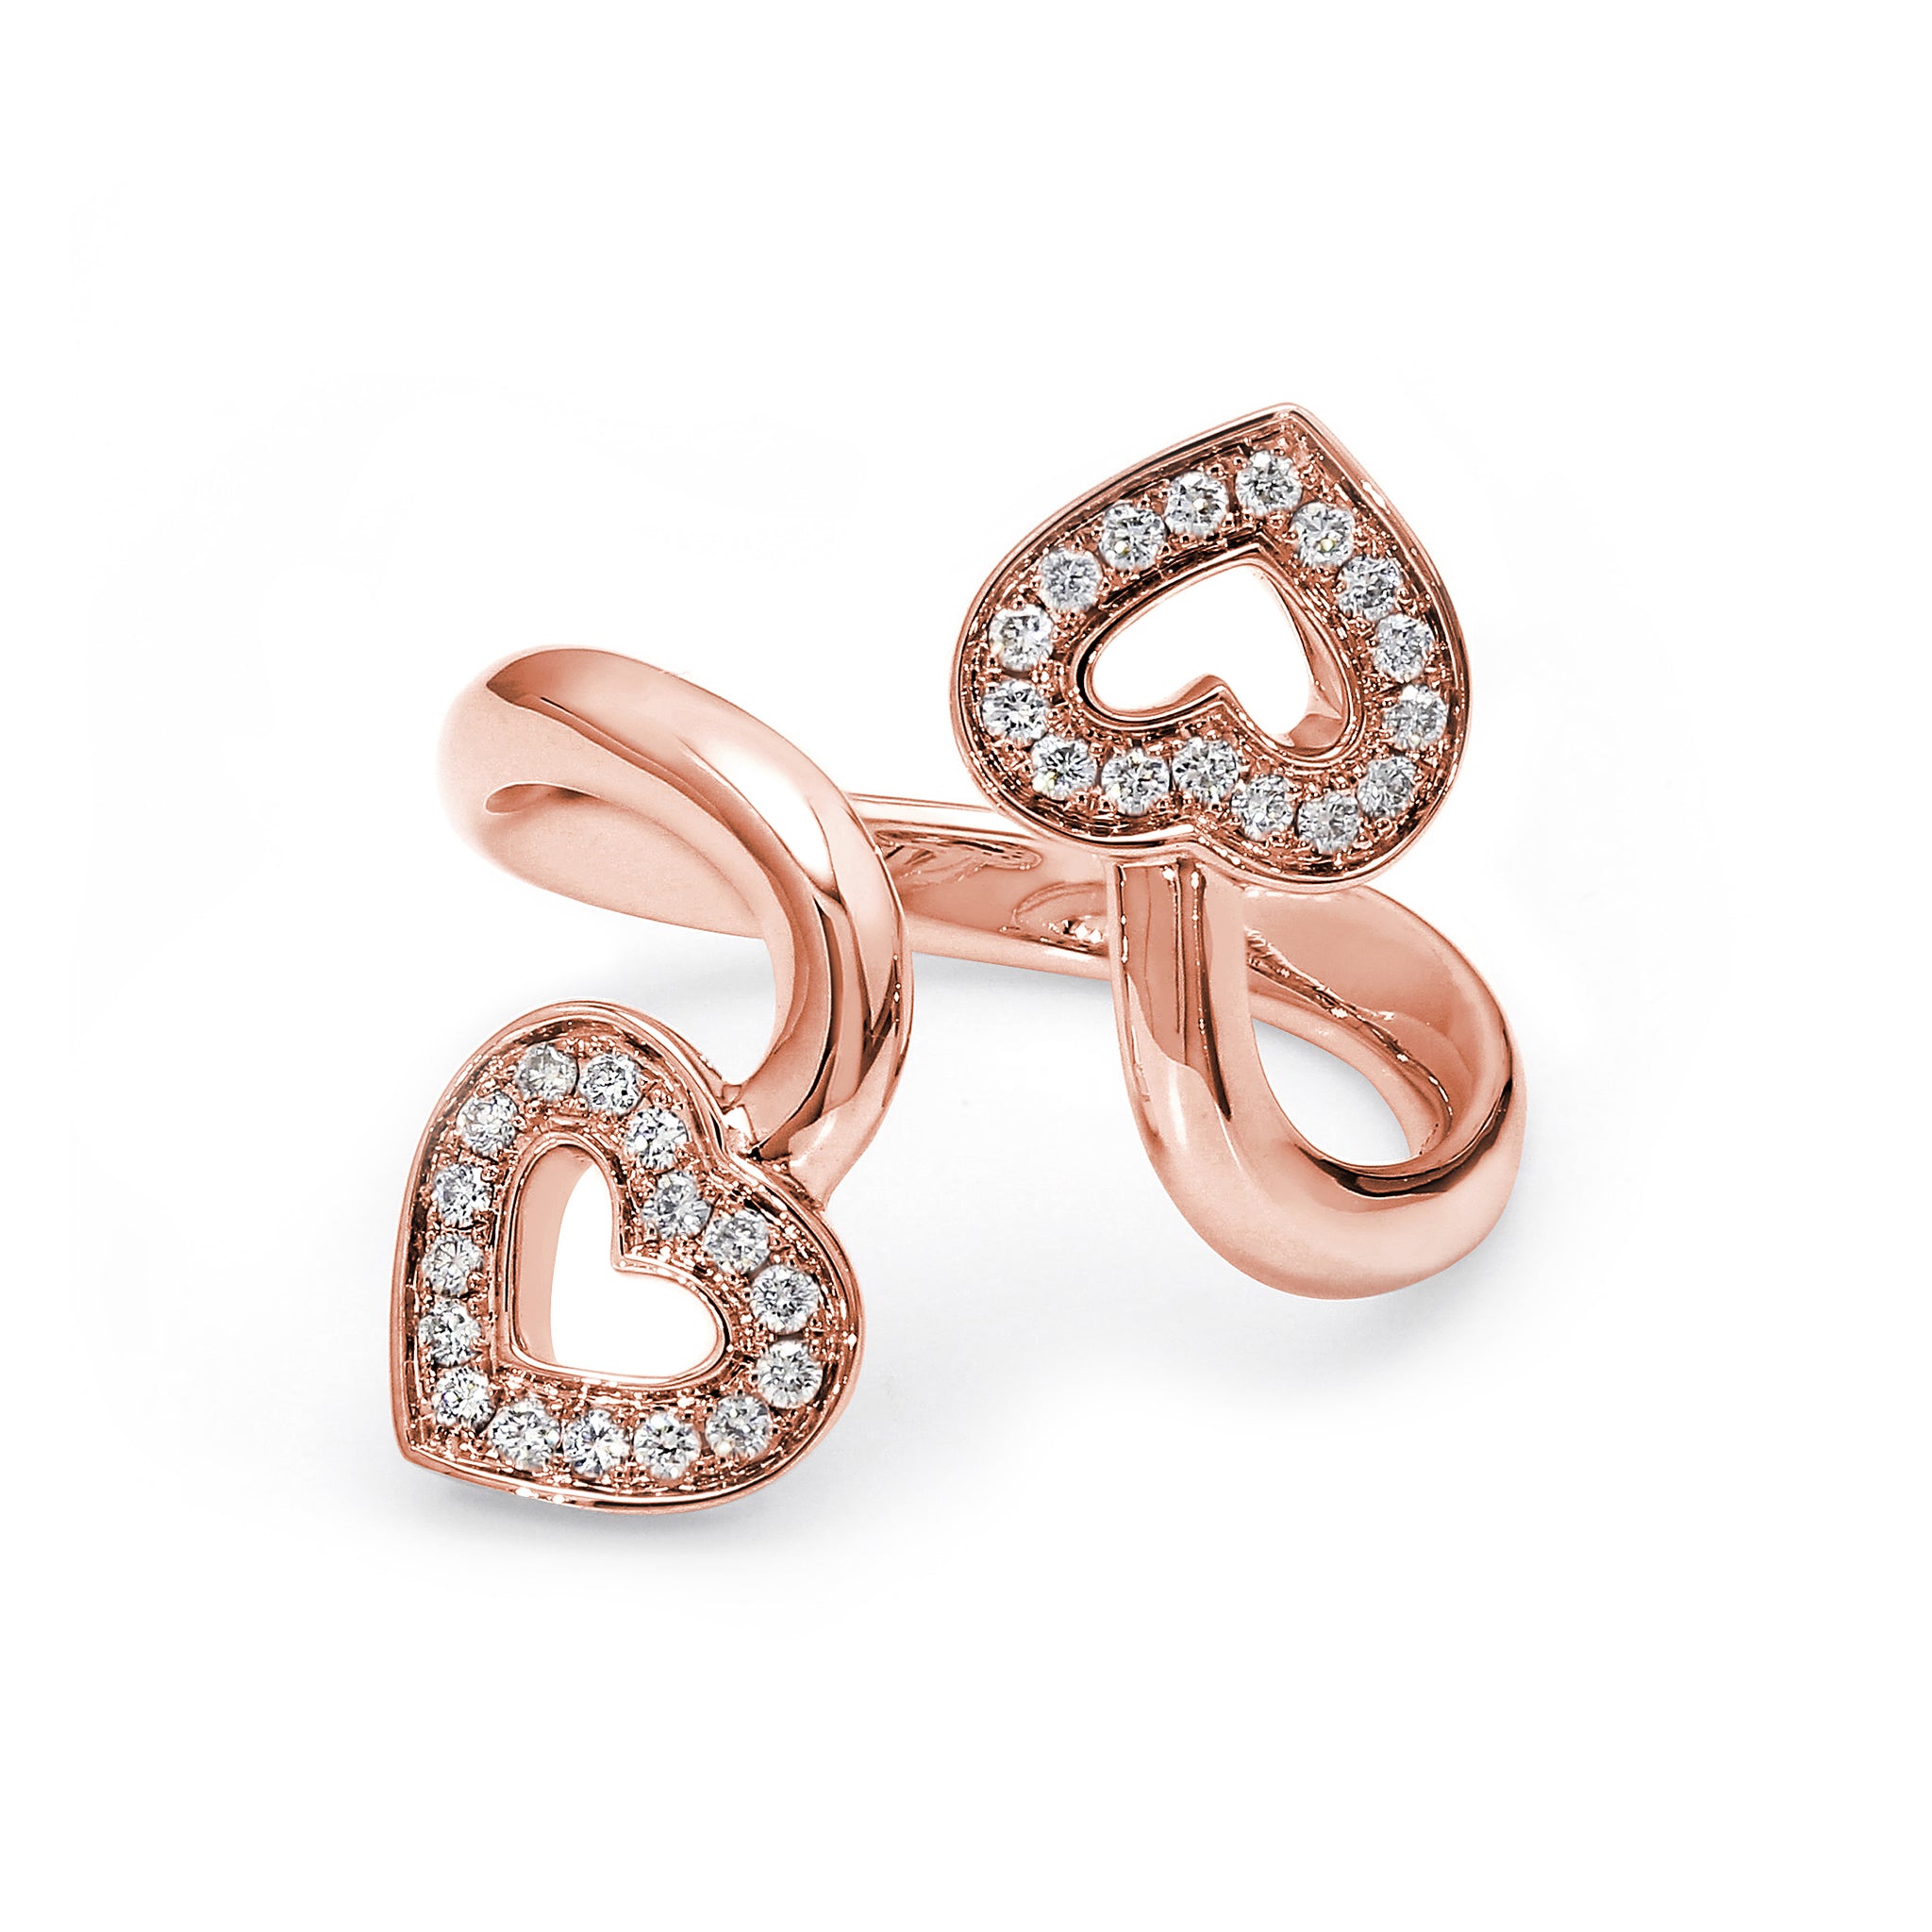 Shimansky - Two Hearts Twist Diamond Pave Ring 0.20ct crafted in 18K Rose Gold